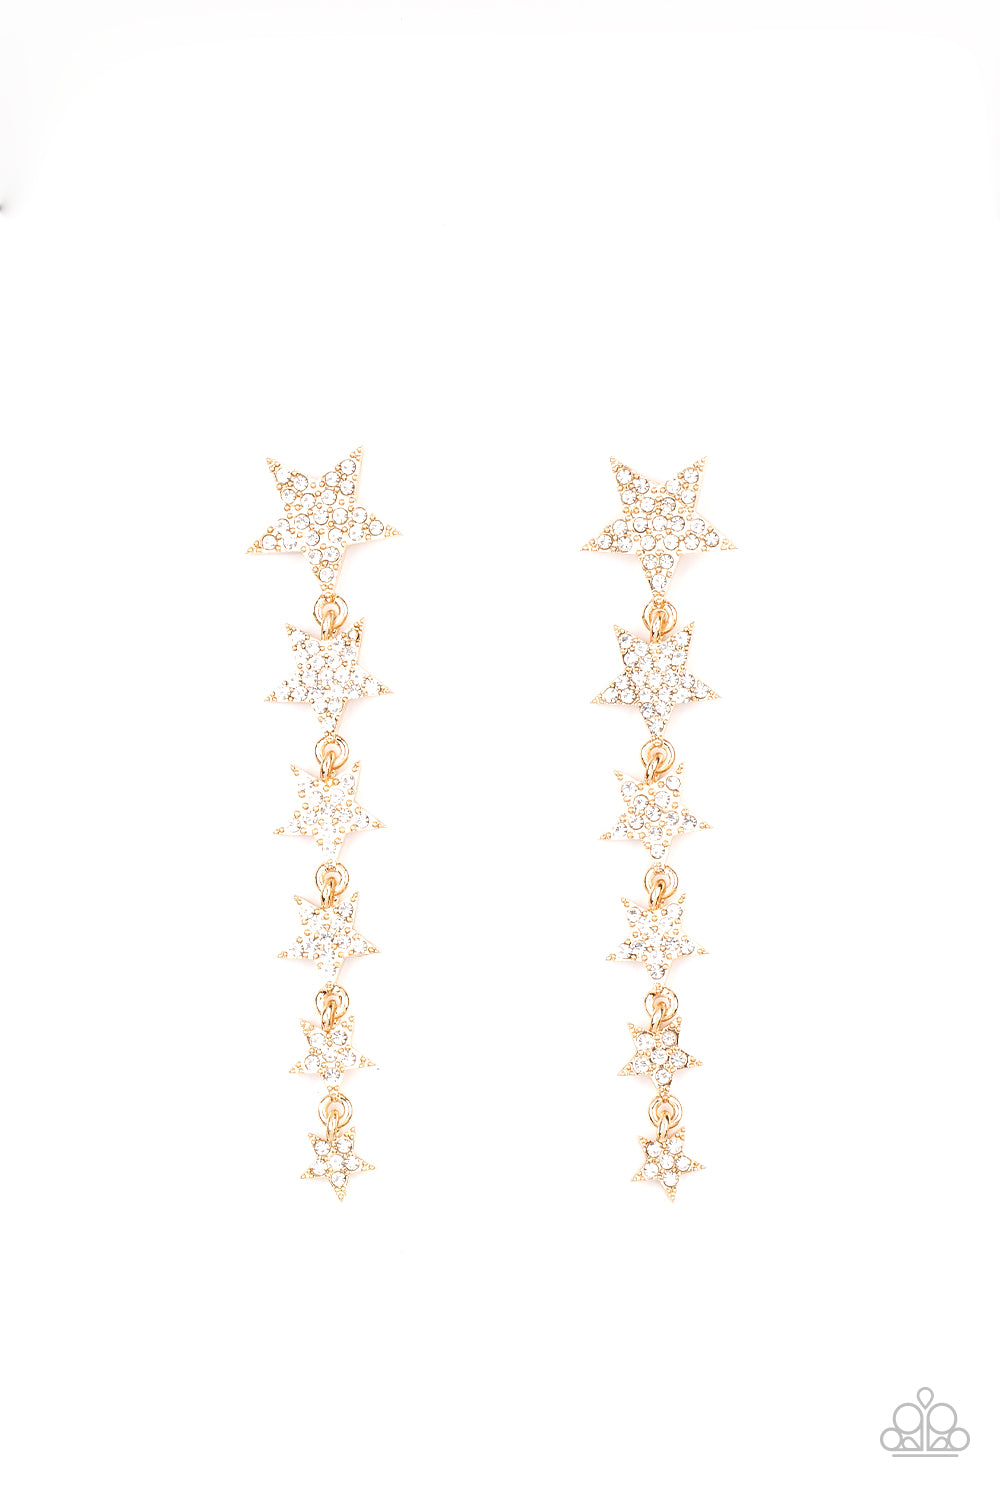 Americana Attitude Gold Star Earring - Paparazzi Accessories   Dotted with dainty white rhinestones, a stellar collection of gold stars graduate in size as they cascade from the ear for an out-of-this-world fashion. Earring attaches to a standard post fitting.  Sold as one pair of post earrings.